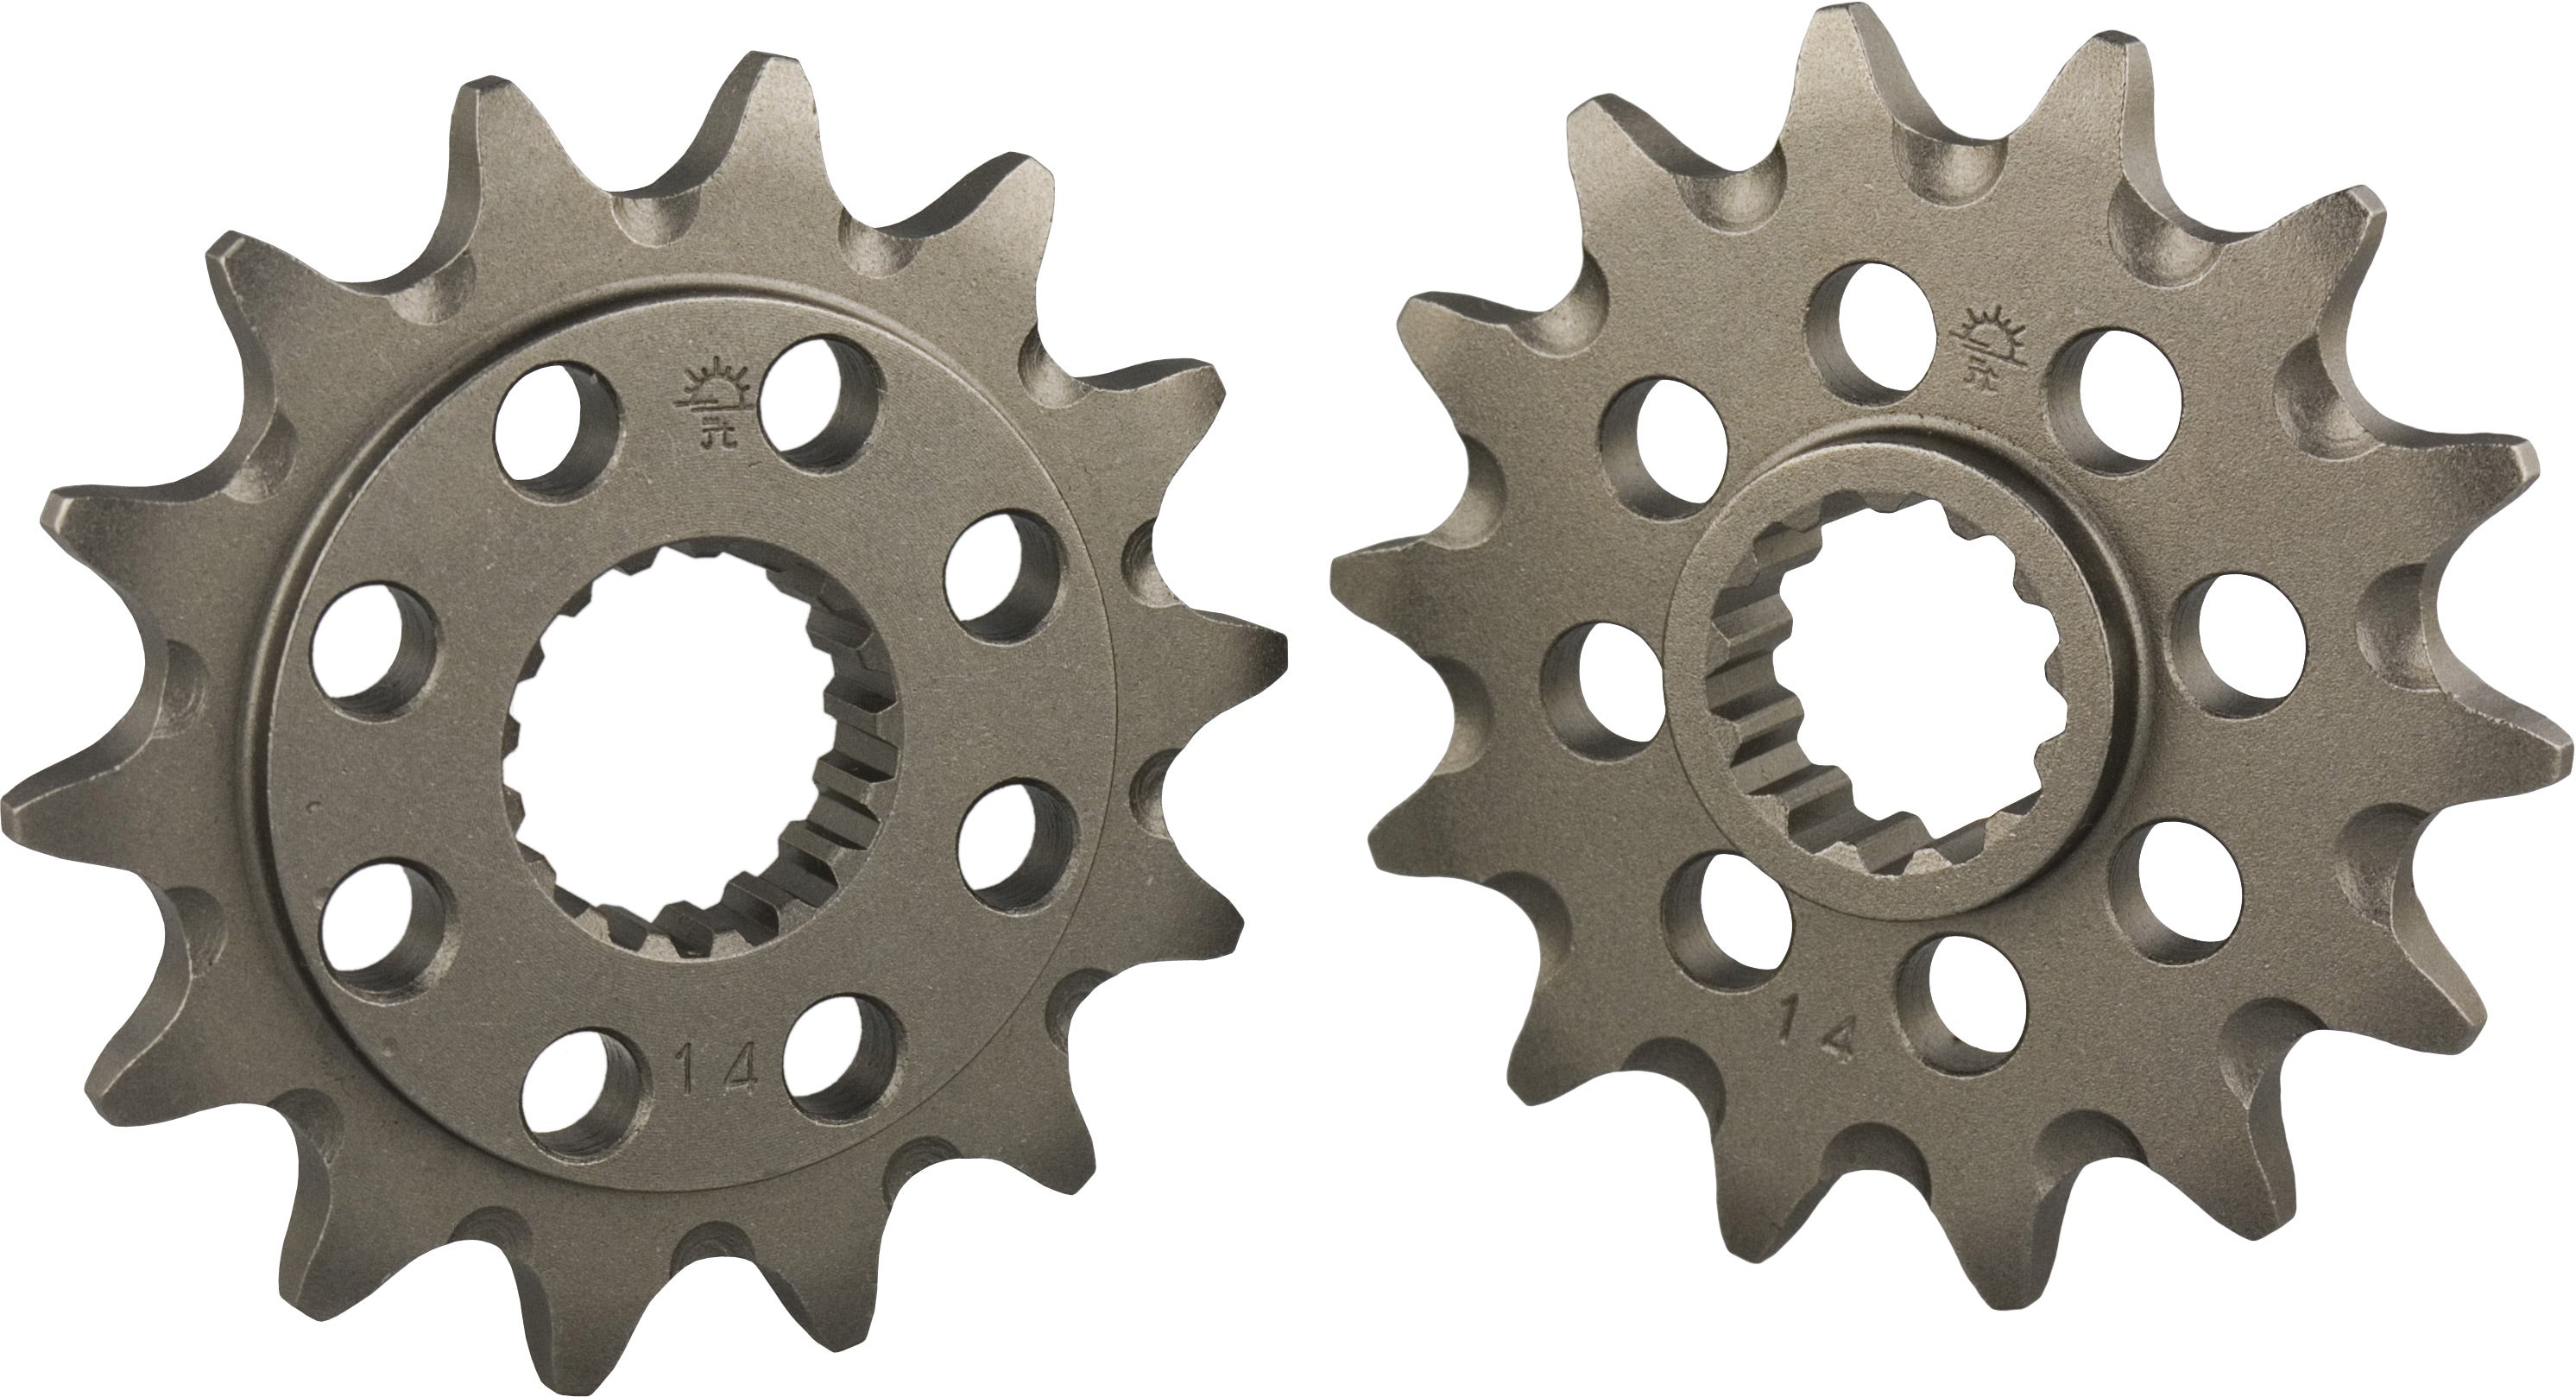 Front Sprocket for CRF250R motorcycle model years 2018 to 2021